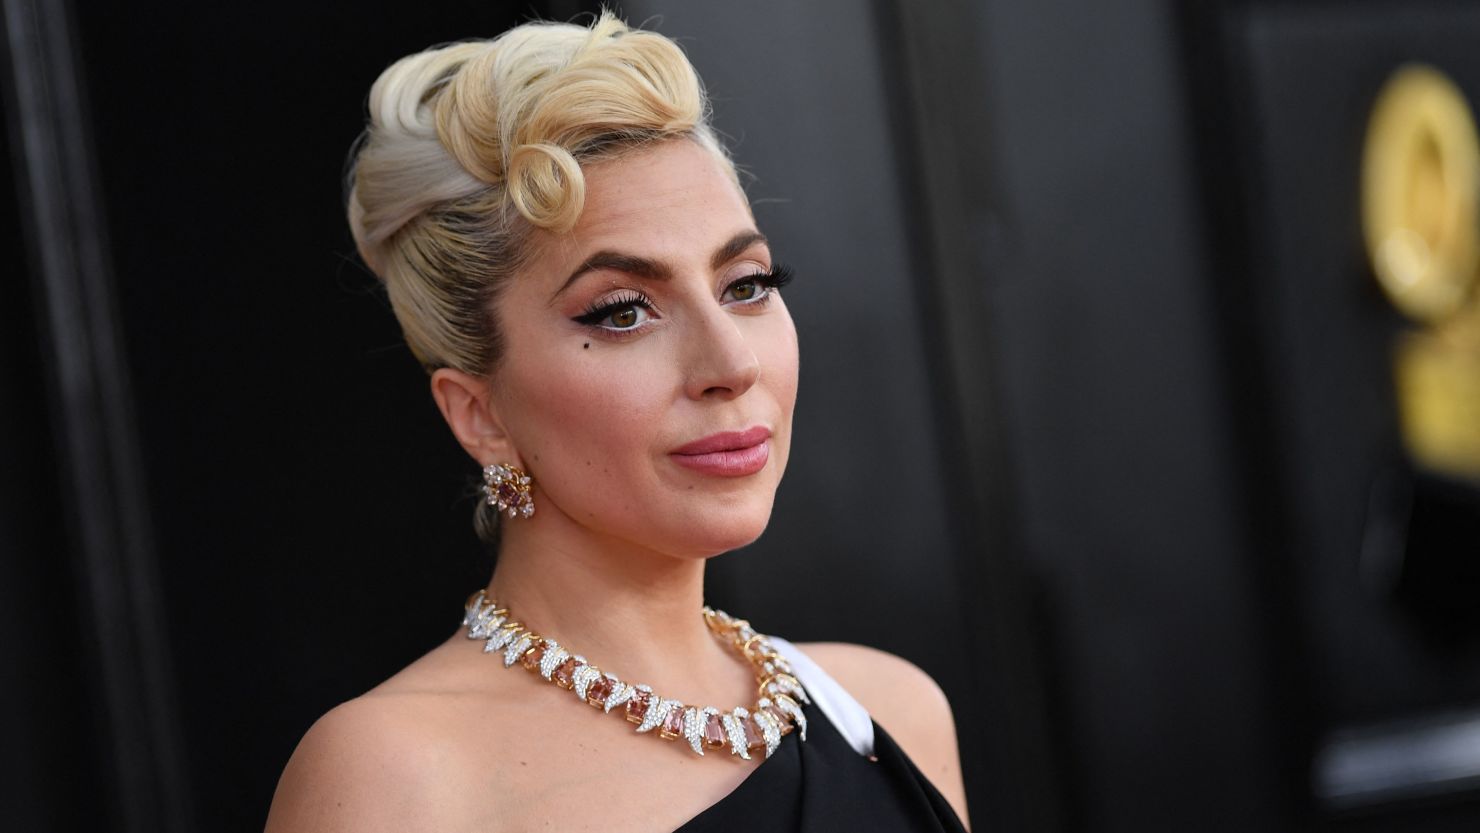 Lady Gaga arrives for the 64th Annual Grammy Awards at the MGM Grand Garden Arena in Las Vegas on April 3, 2022.